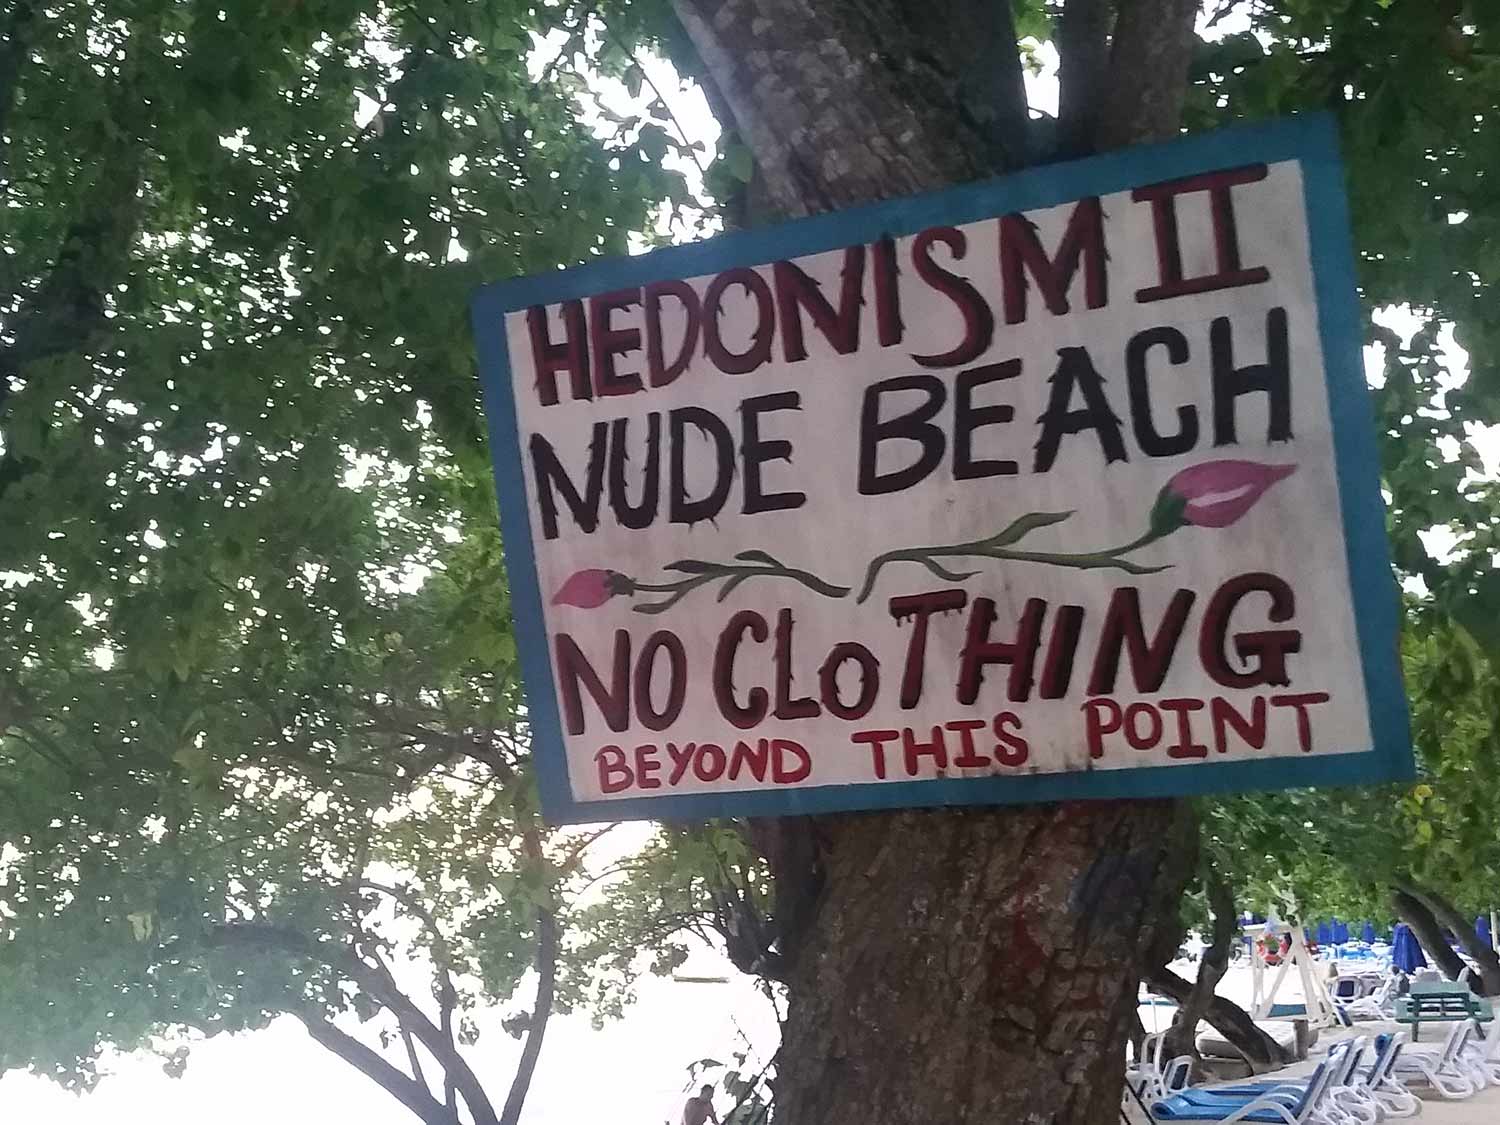 A welcome sign at the Hedonism II beach warns visitors that no clothing is allowed.